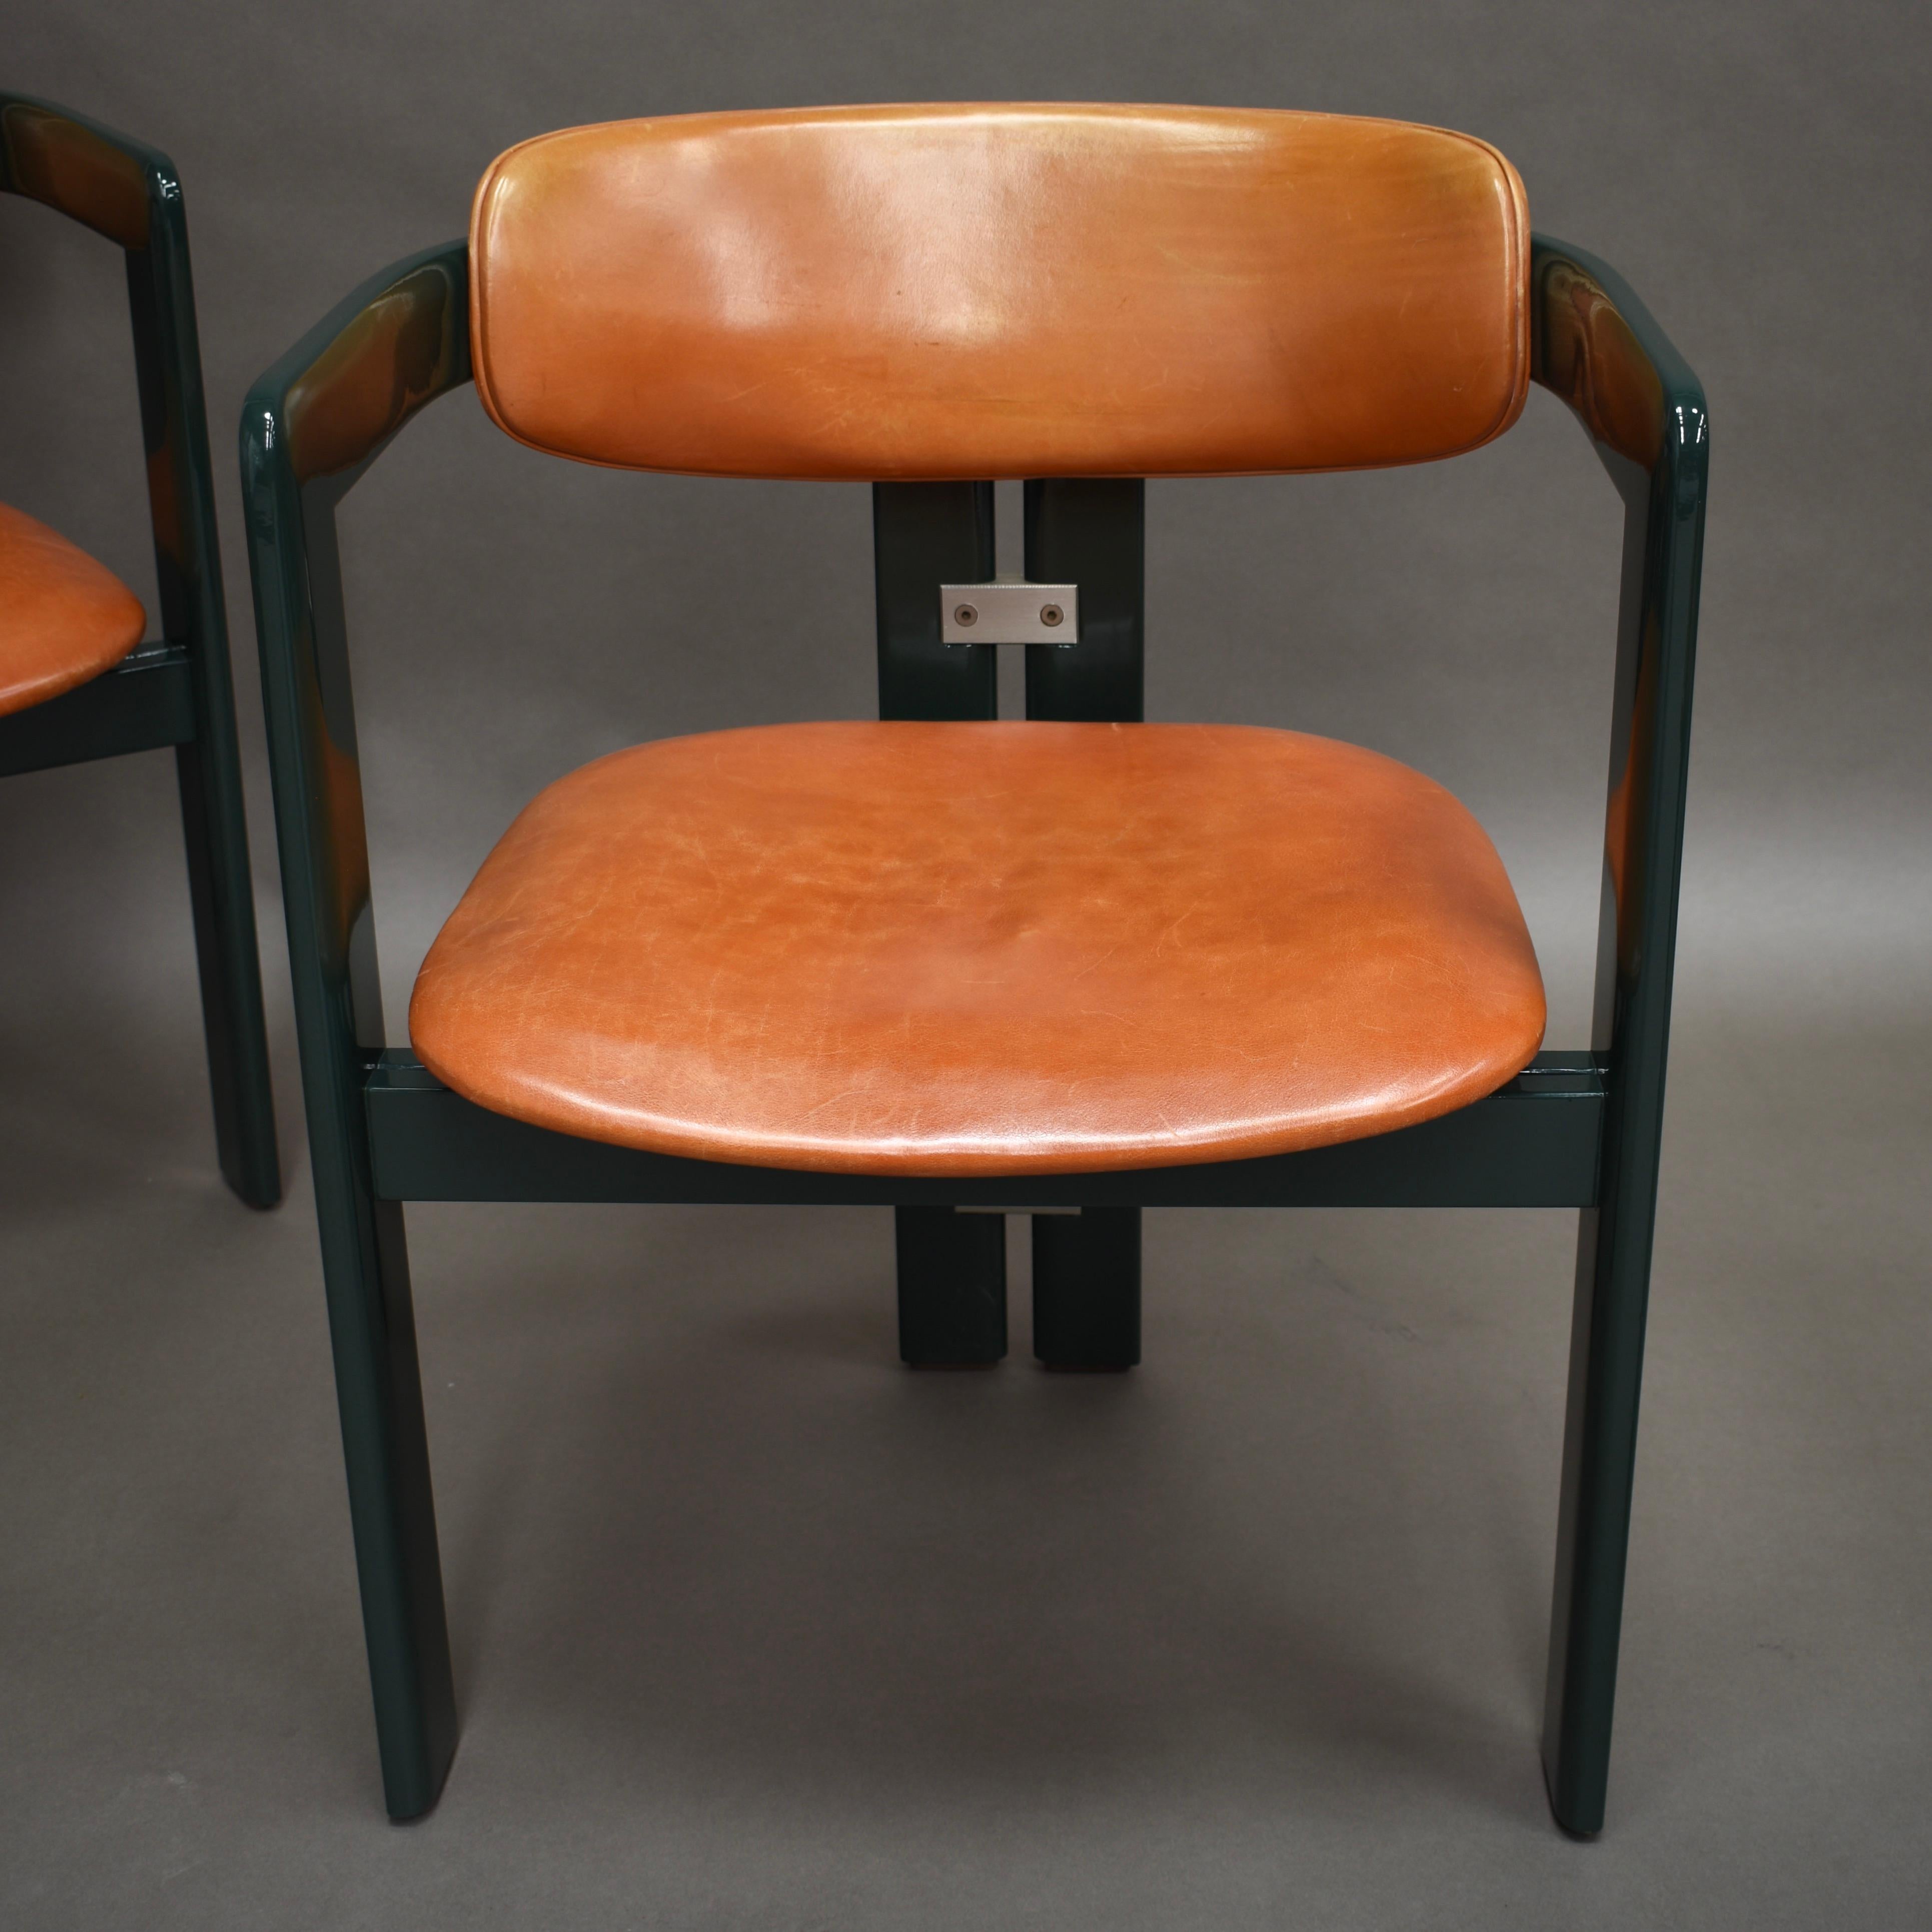 Mid-20th Century Pamplona Chairs by Augusti Savini in Green and Tan Leather, Italy, 1965